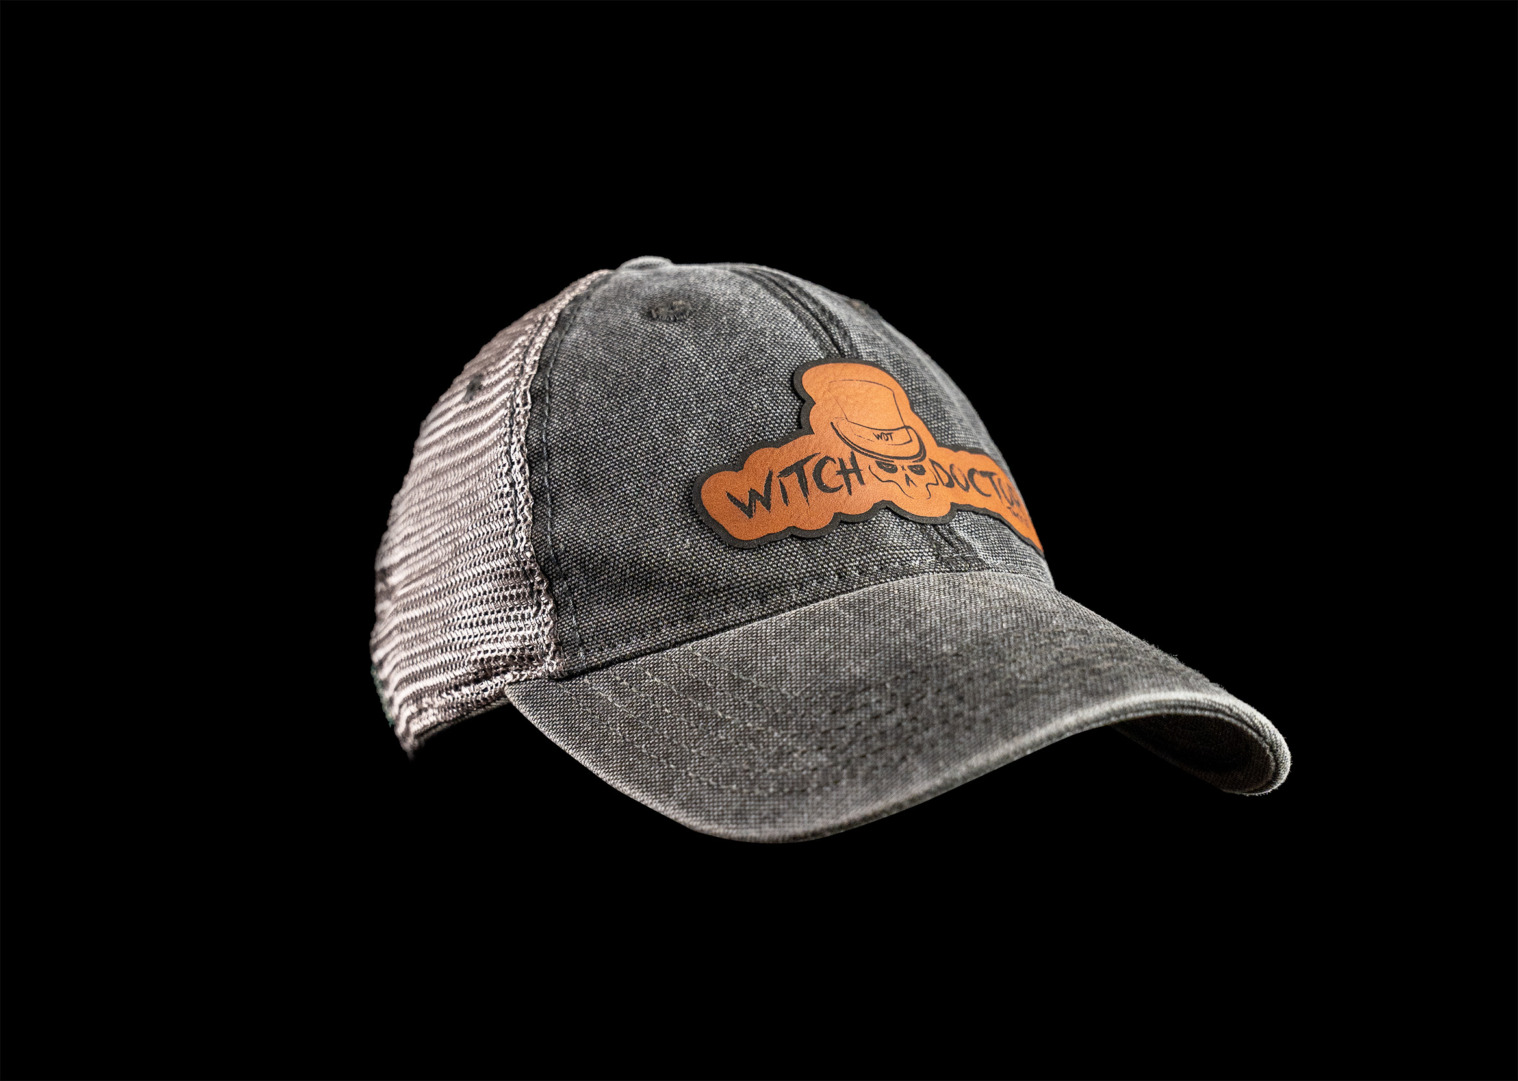 Witch Doctor Tackle logo leather patch hat